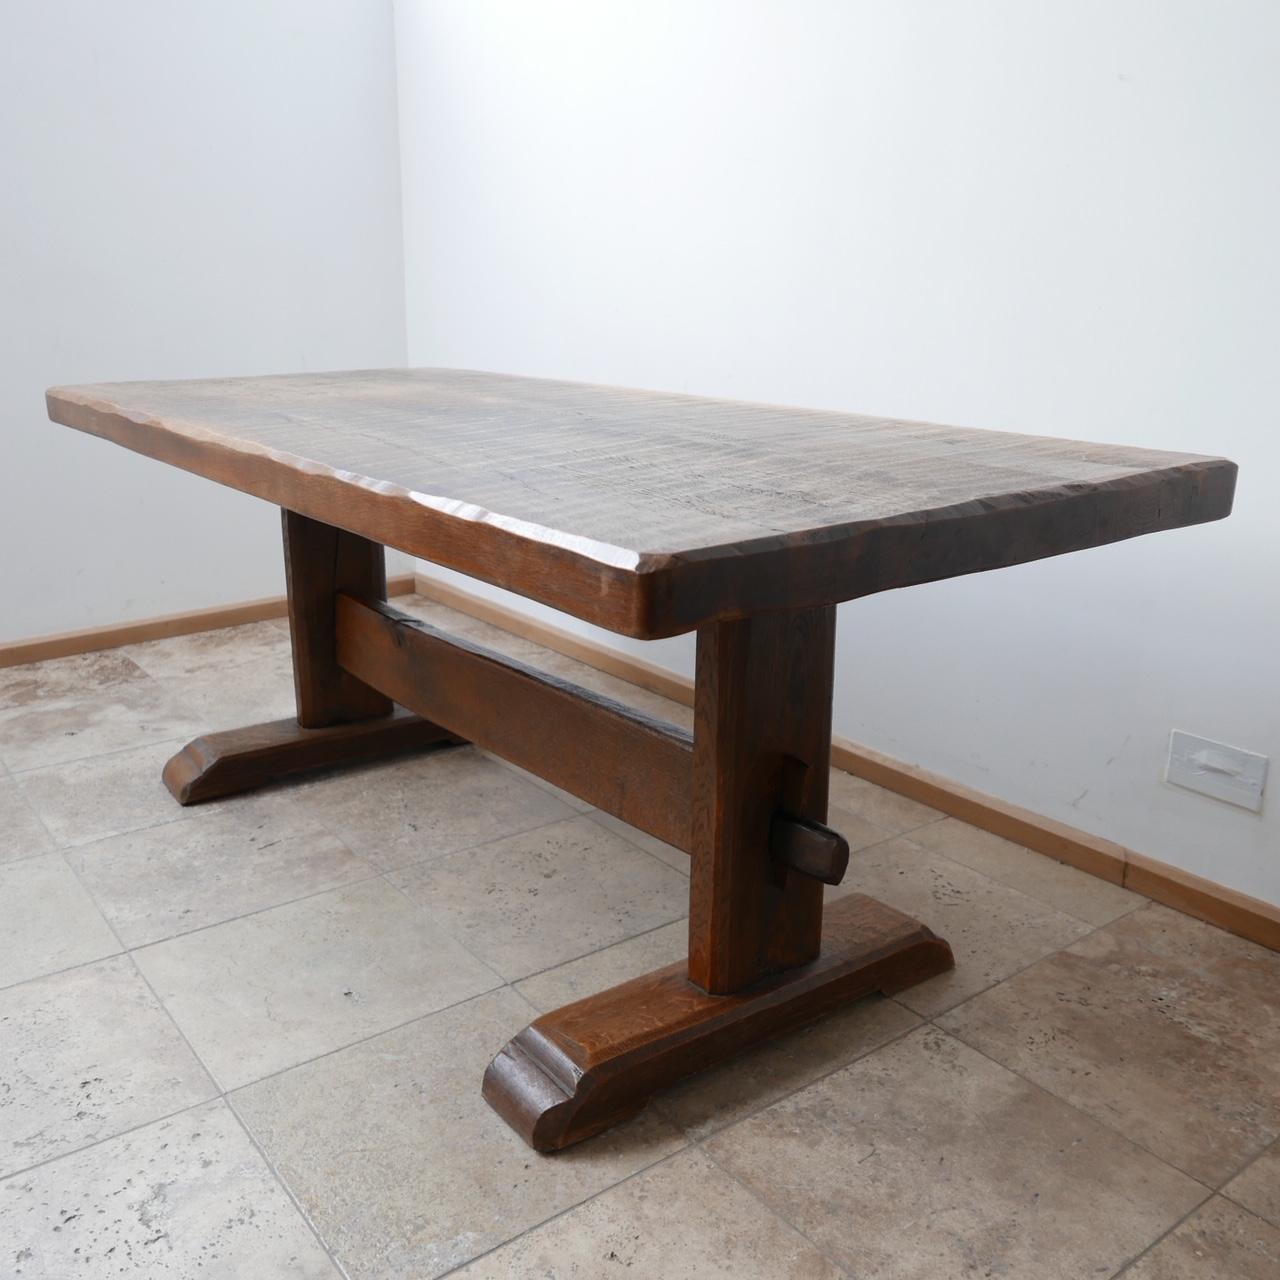 A thick topped brutalist dining table. 

Gently adzed top. Lovely rustic appeal. 

Holland, c1970s.

Knocks down for transport. 

Some age related wear but generally good condition. 

Location: London Gallery. 

Dimensions: 188 W x 86 D x 74 Total